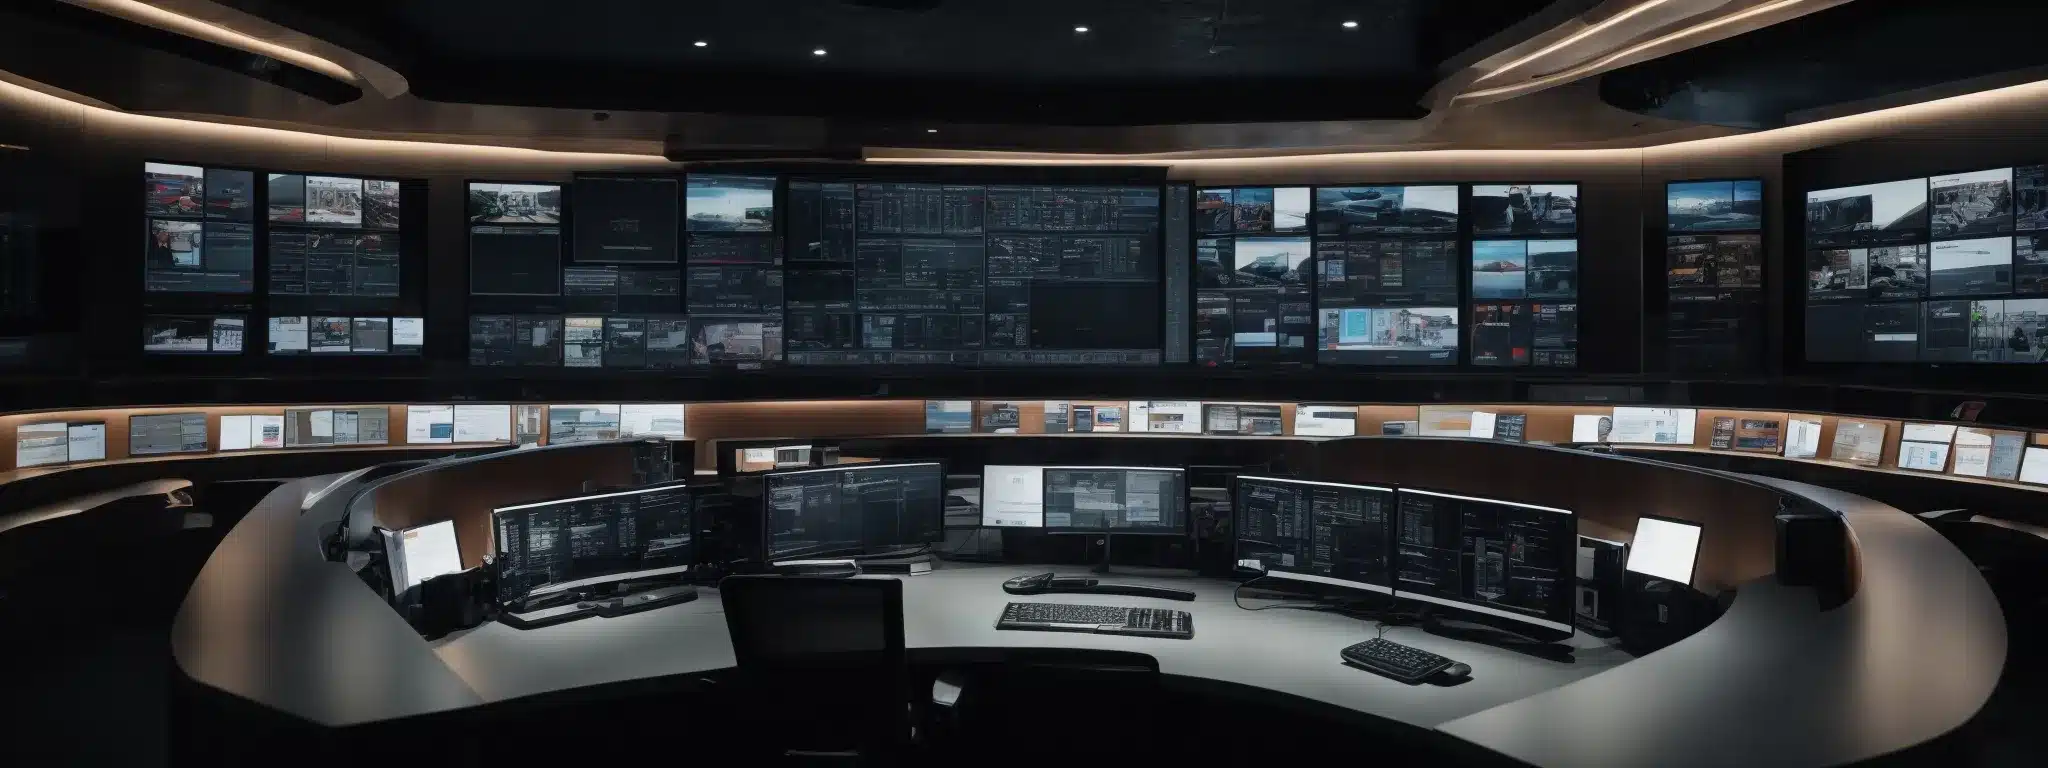 A Modern, Minimalist Control Room With Screens Displaying Various Social Media Platforms Seamlessly Integrated Into An Elegant Website Interface.